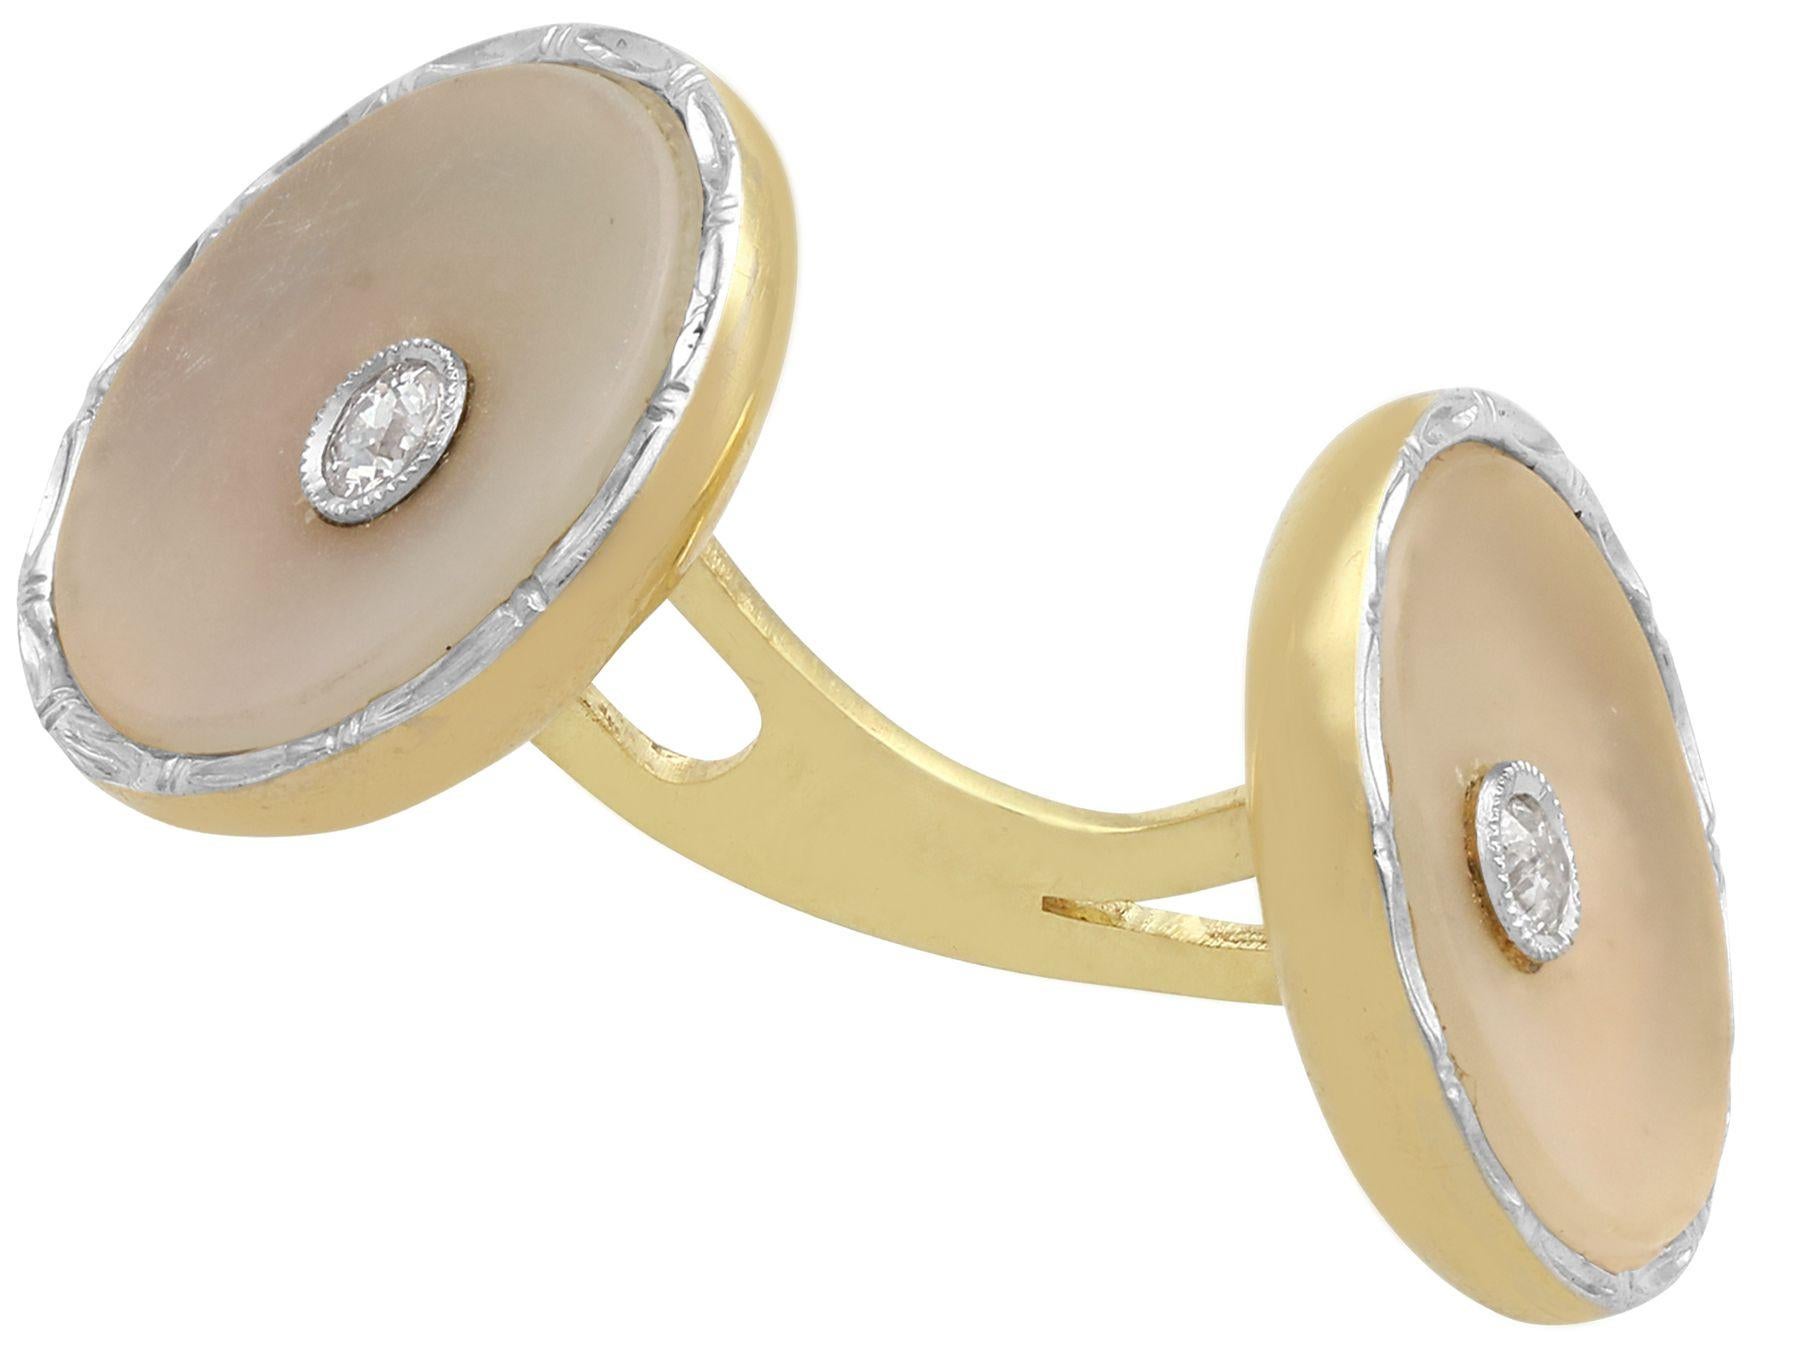 A fine and impressive antique diamond and crystal, 14 karat yellow gold, platinum set cufflink and collar stud set; part of our antique jewelry and estate jewelry collections.

These fine crystal cufflinks and collar studs have been crafted in 14k